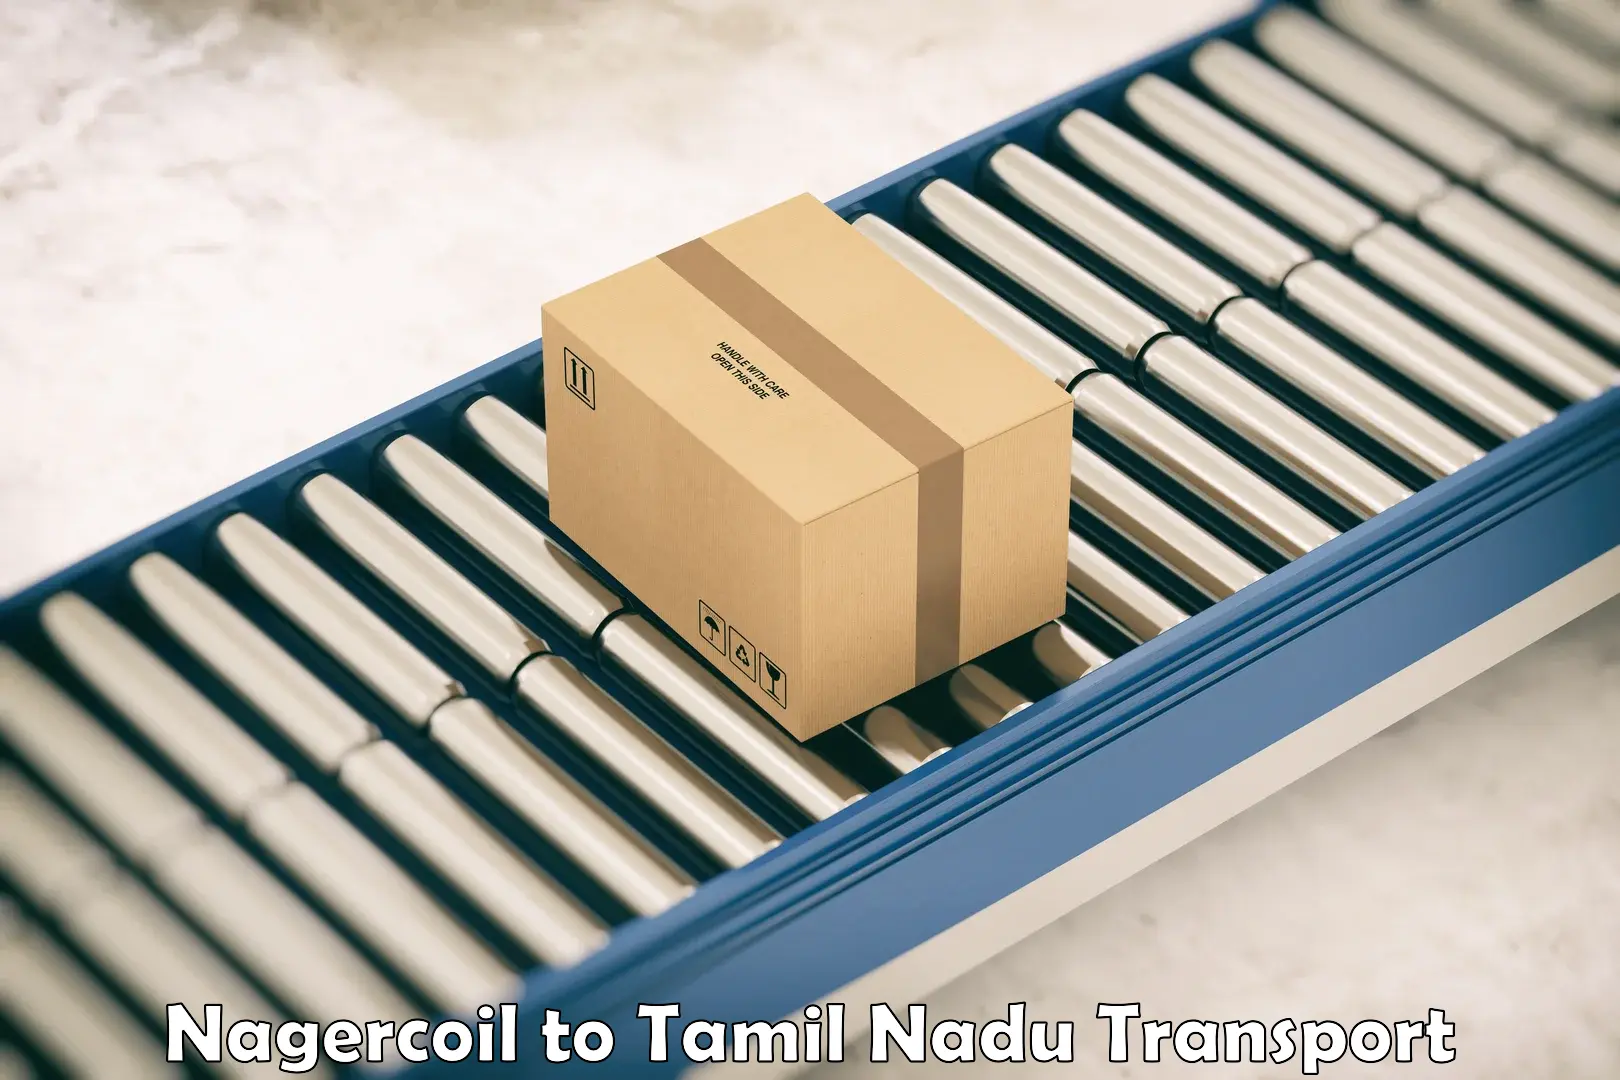 Truck transport companies in India Nagercoil to Vellore Institute of Technology